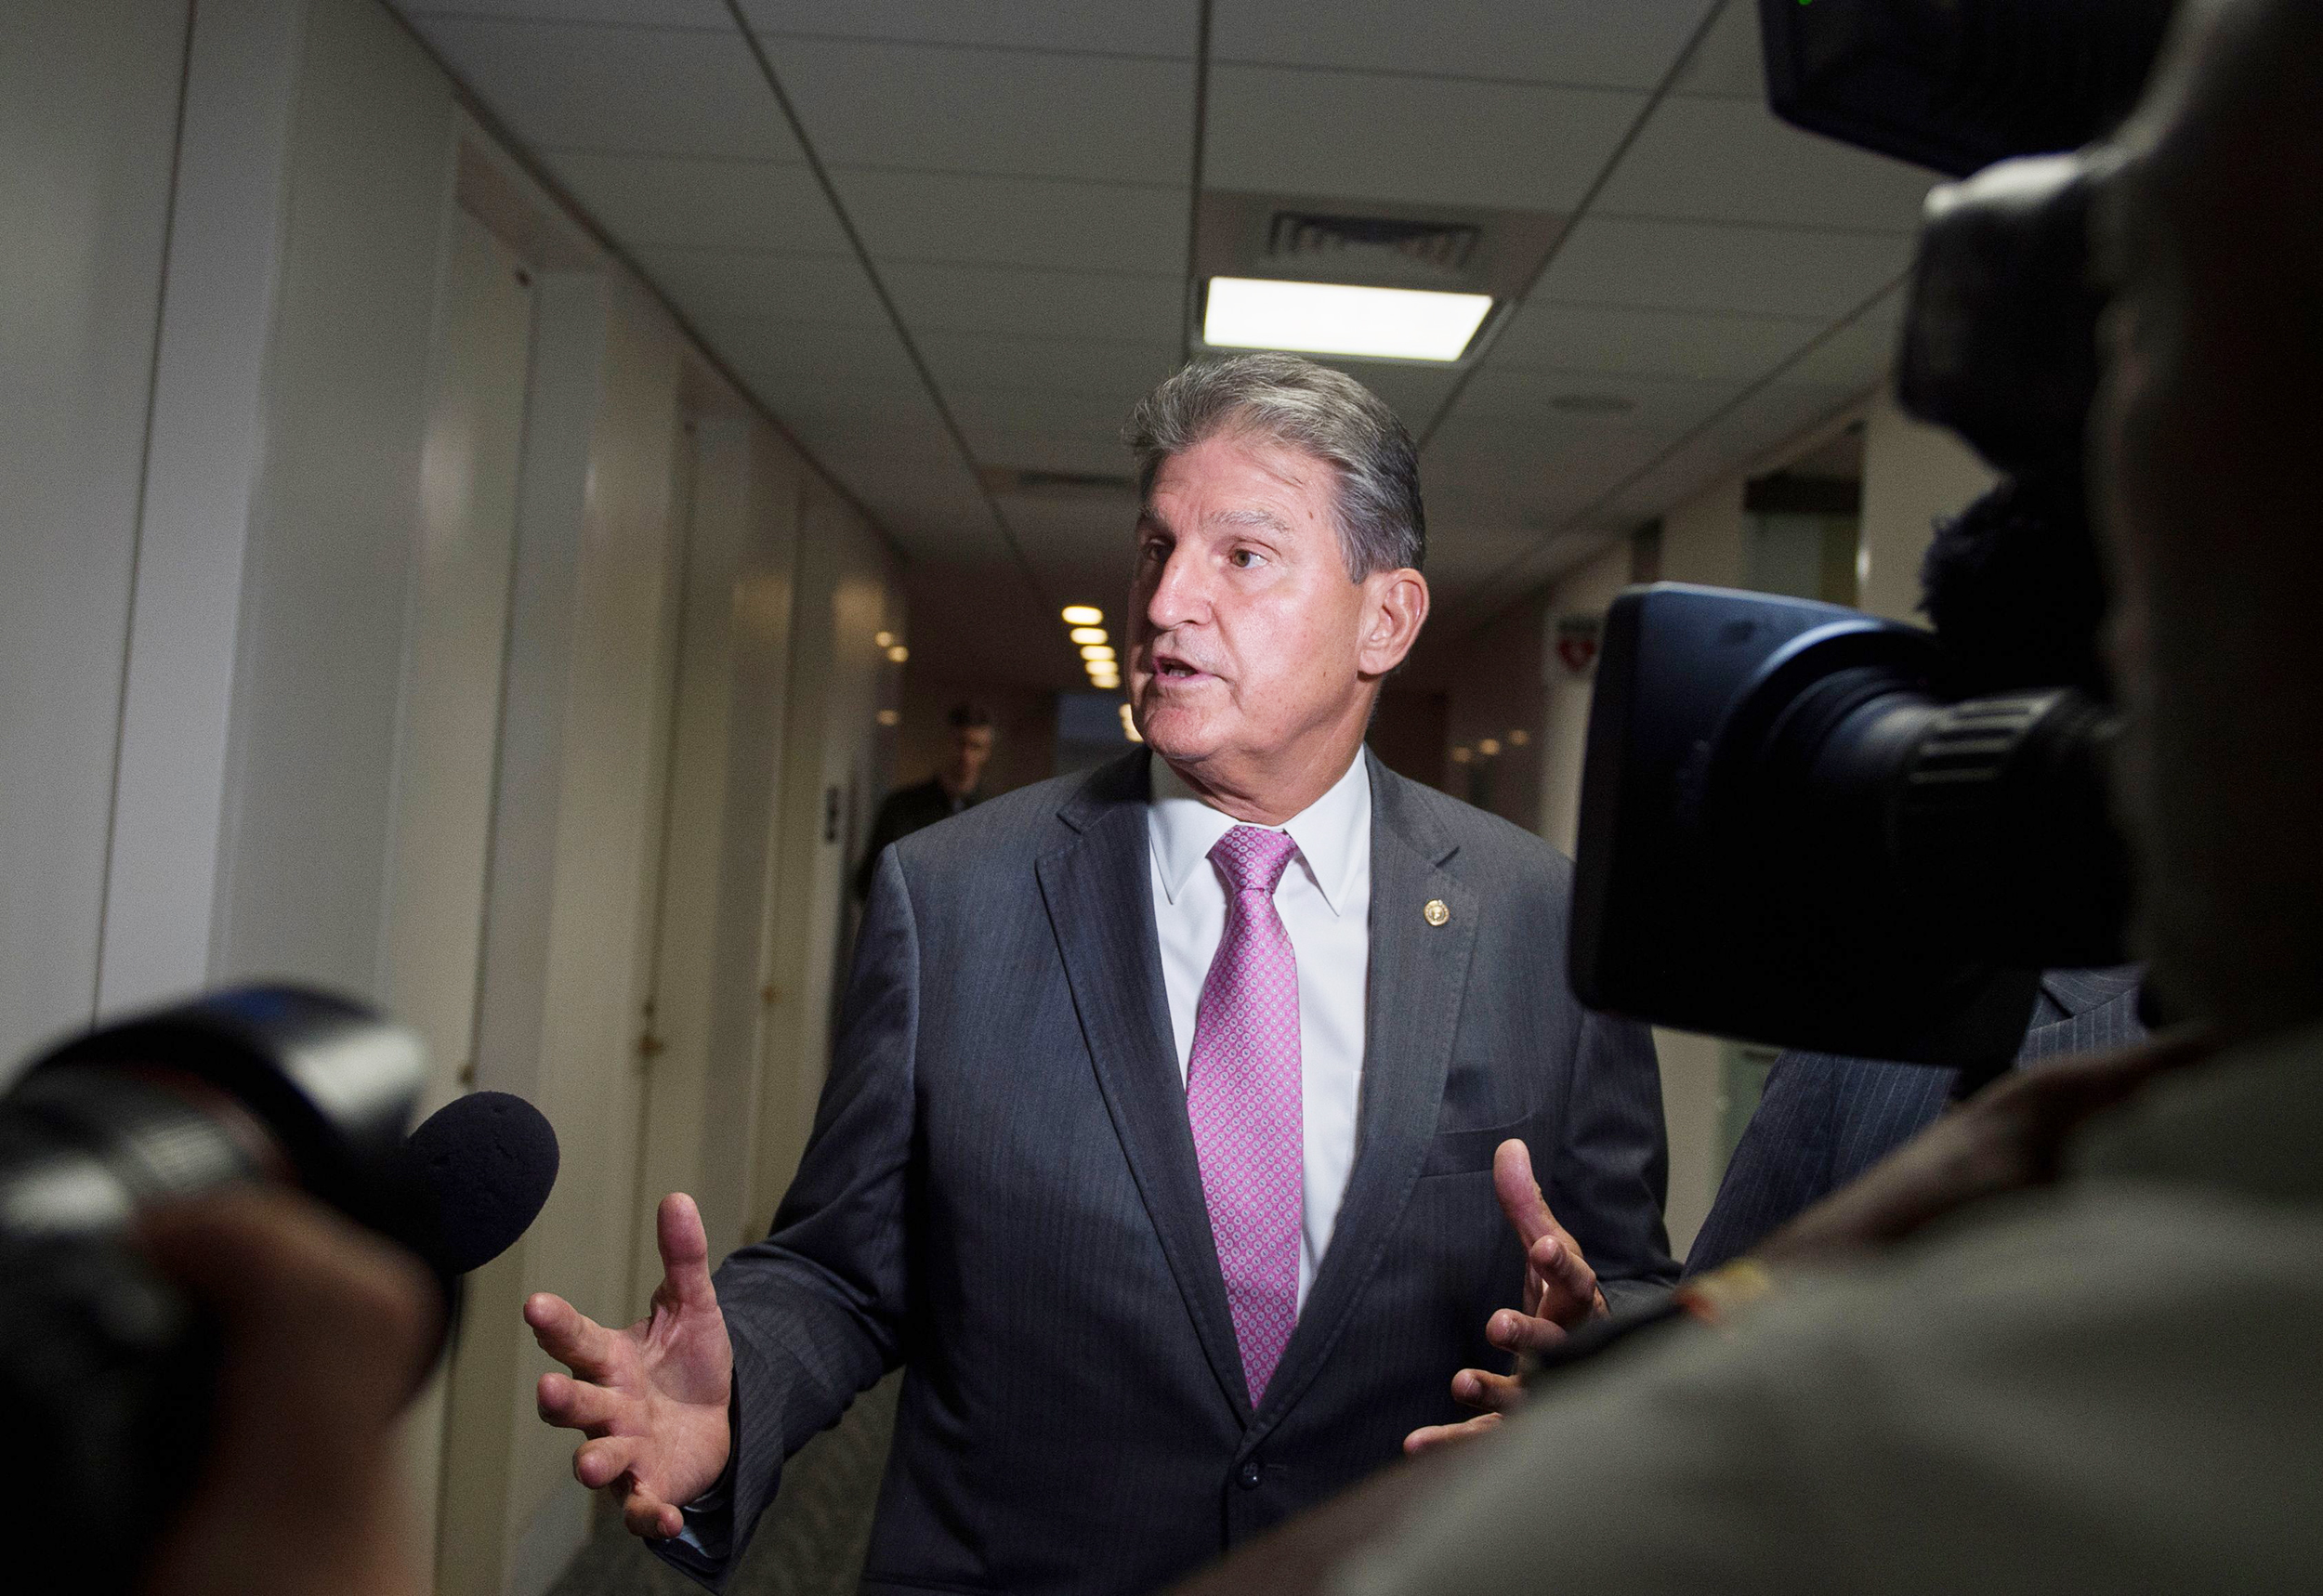 PHOTO: U.S. Senator Joe Manchin speaks with reporters in the Senate Hart building as a rally against Supreme Court nominee Brett Kavanaugh takes place on Capitol Hill in Washington, D.C., Oct. 4, 2018.